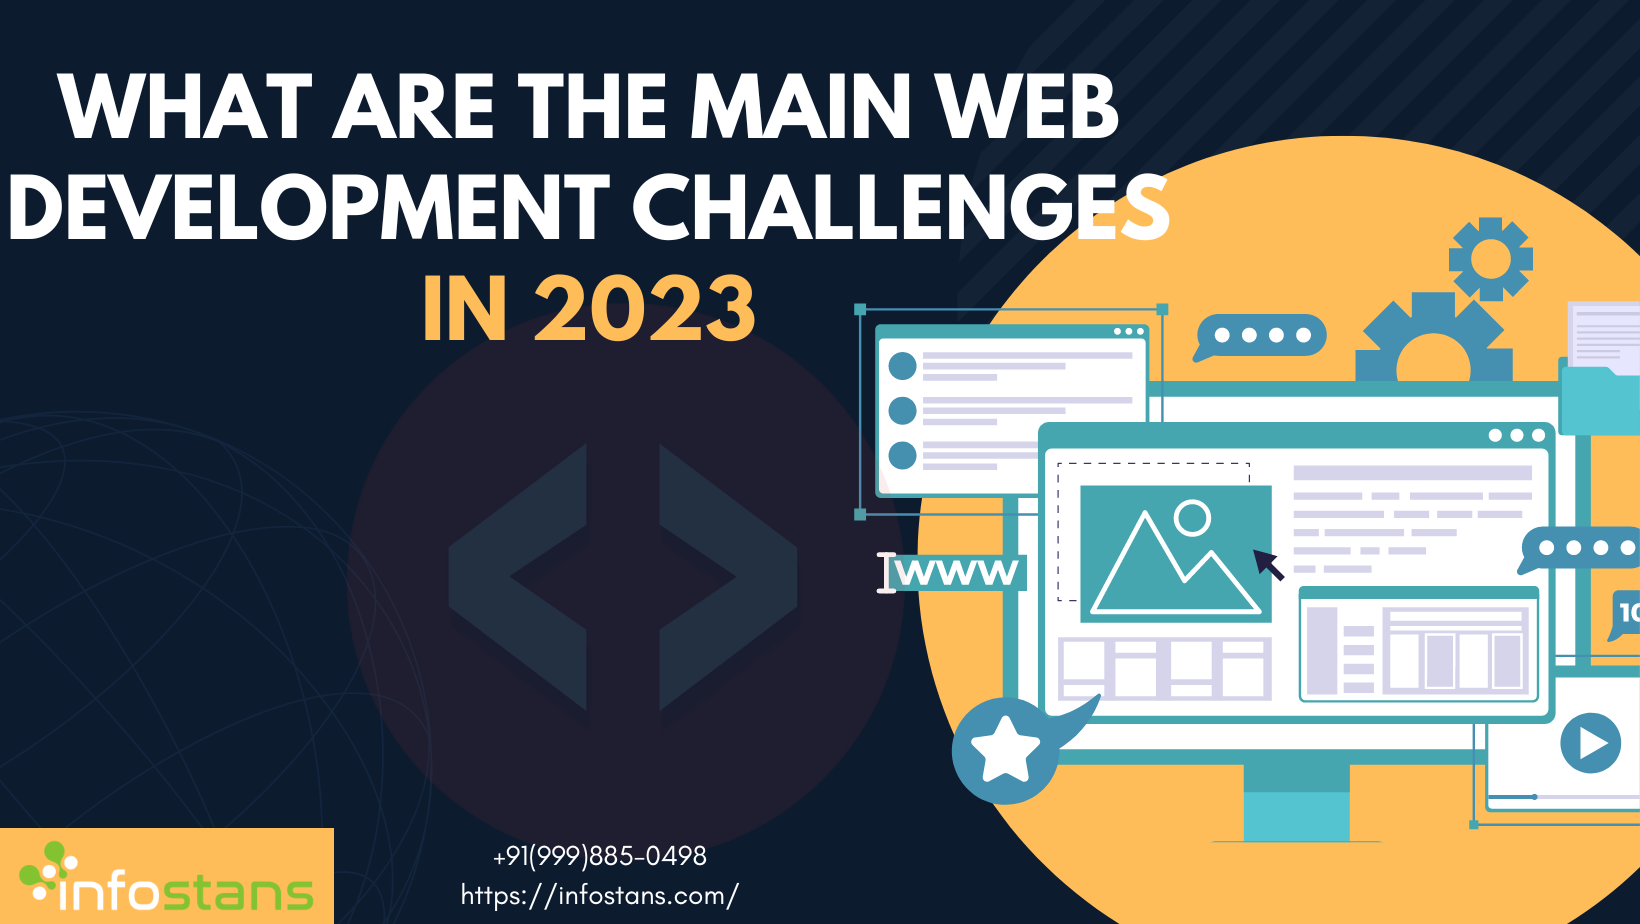 What Are The Main Web Development Challenges in Upcoming Years?